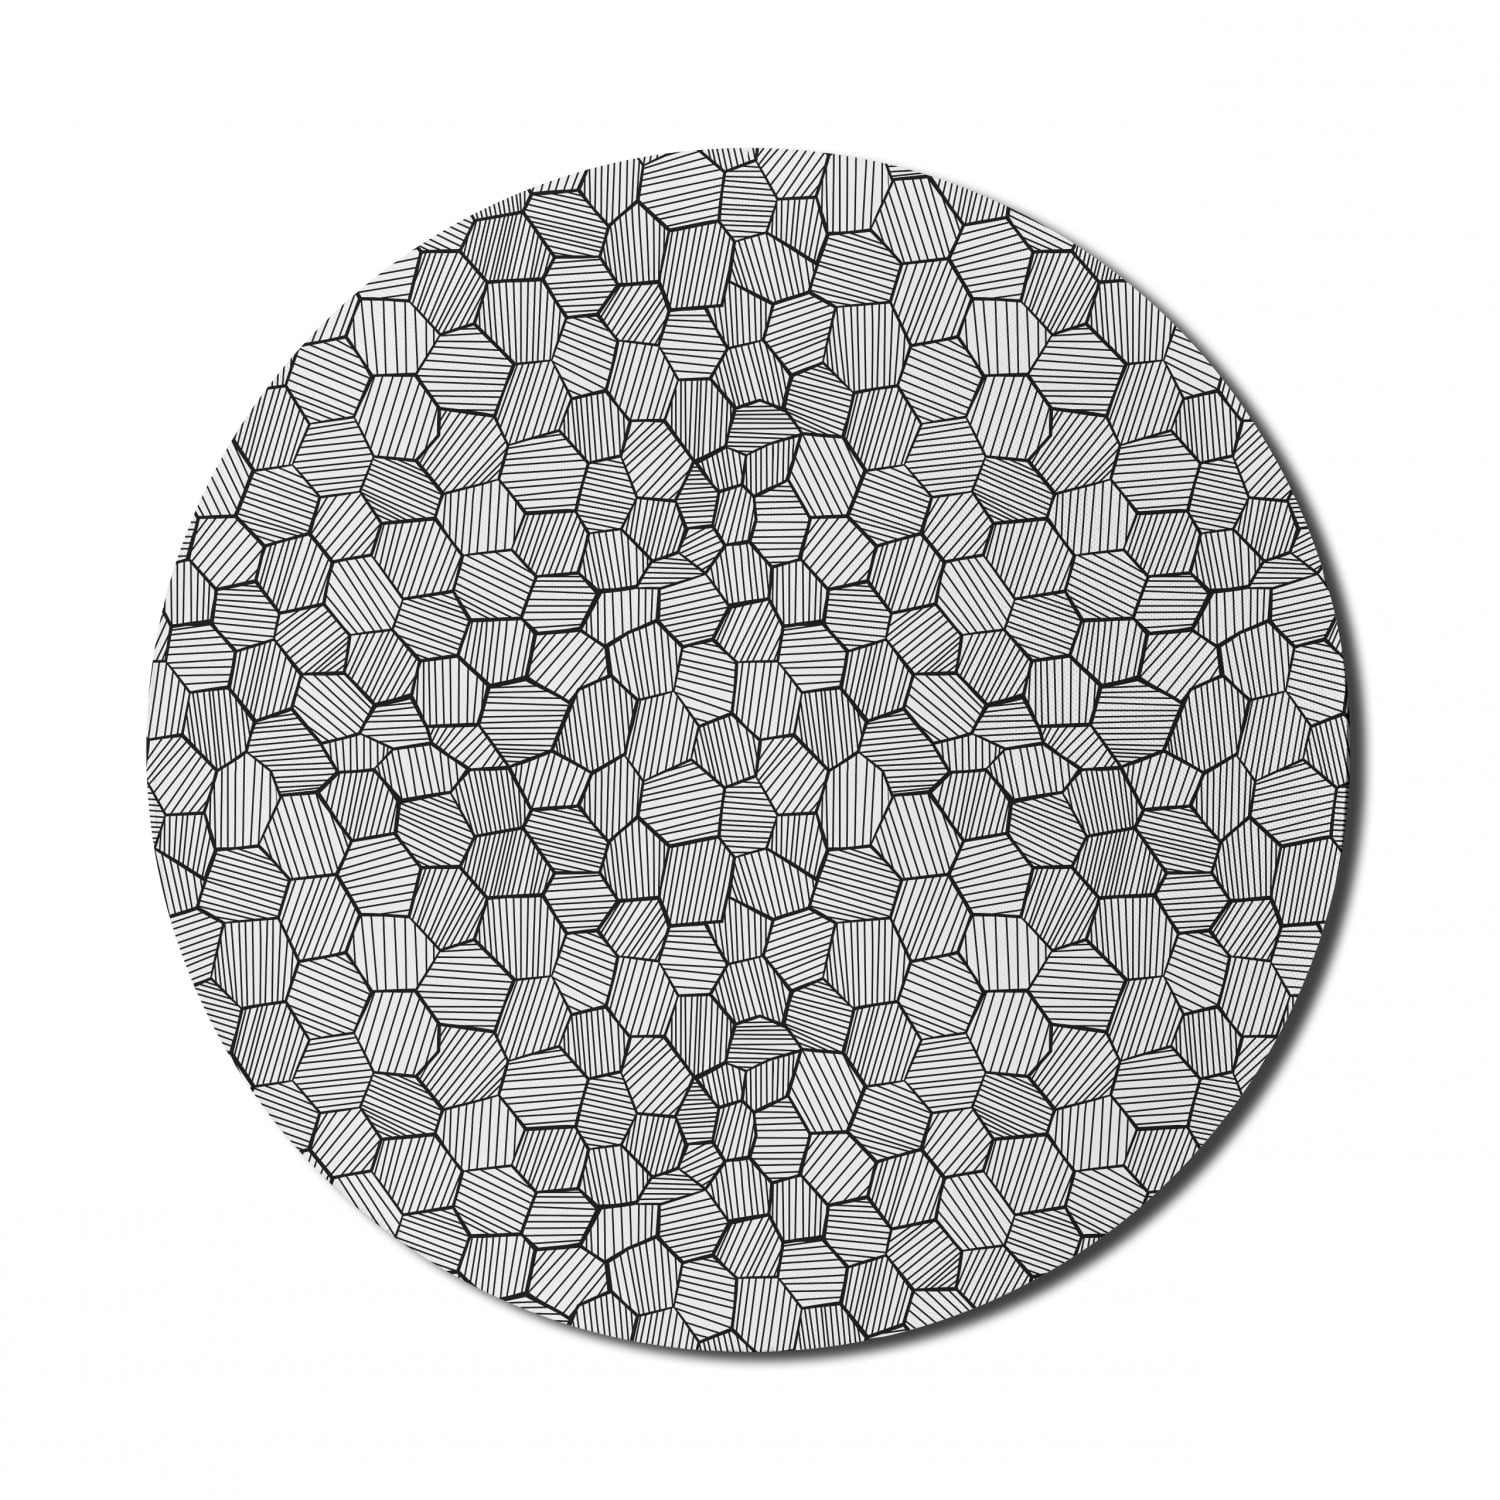 How to create a hexagonal grille pattern, normal to surface in Solidworks –  AJ Design Studio